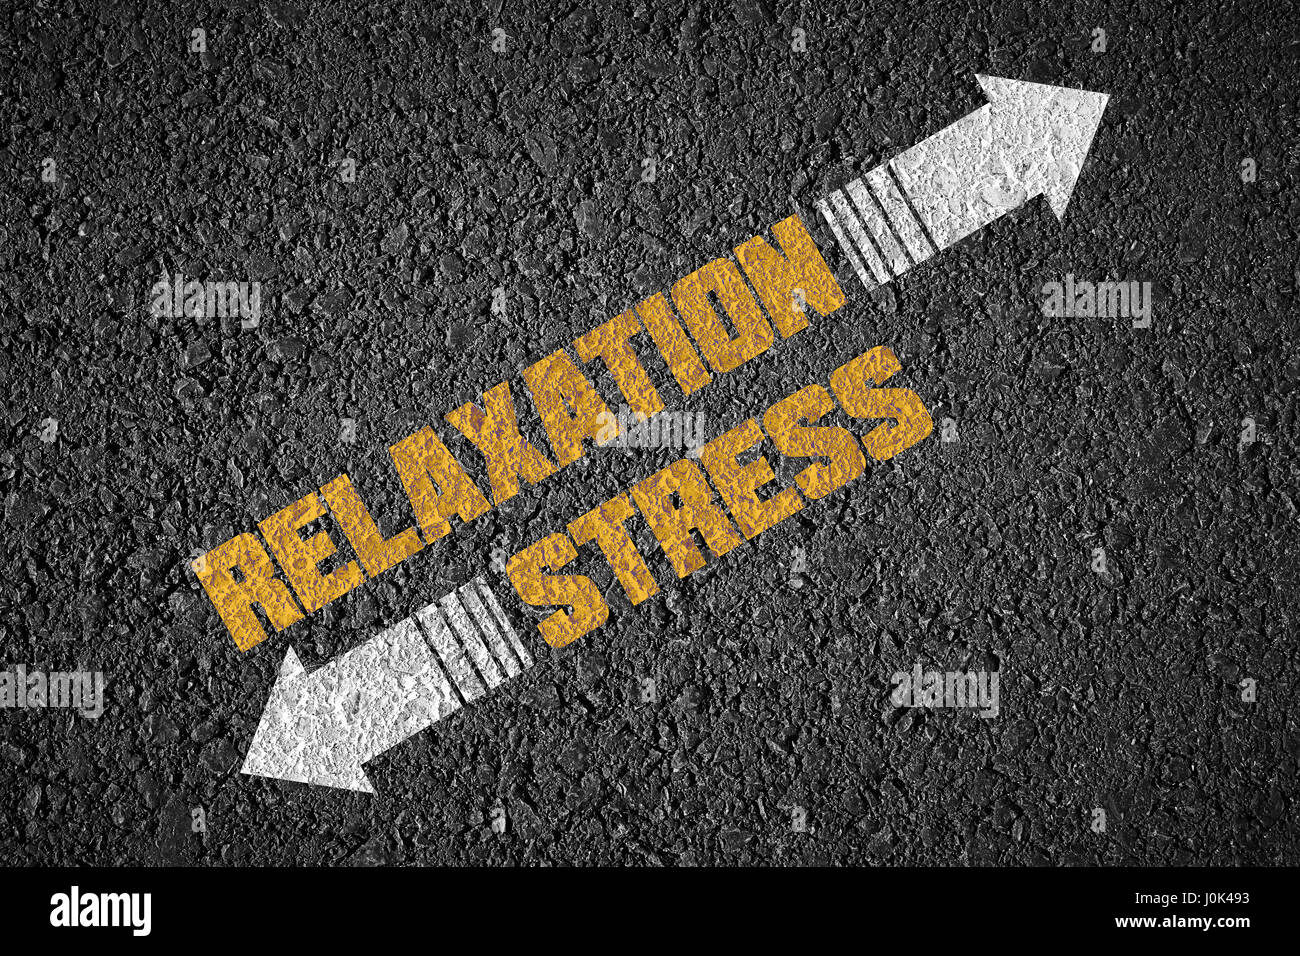 Relax or stress Stock Photo